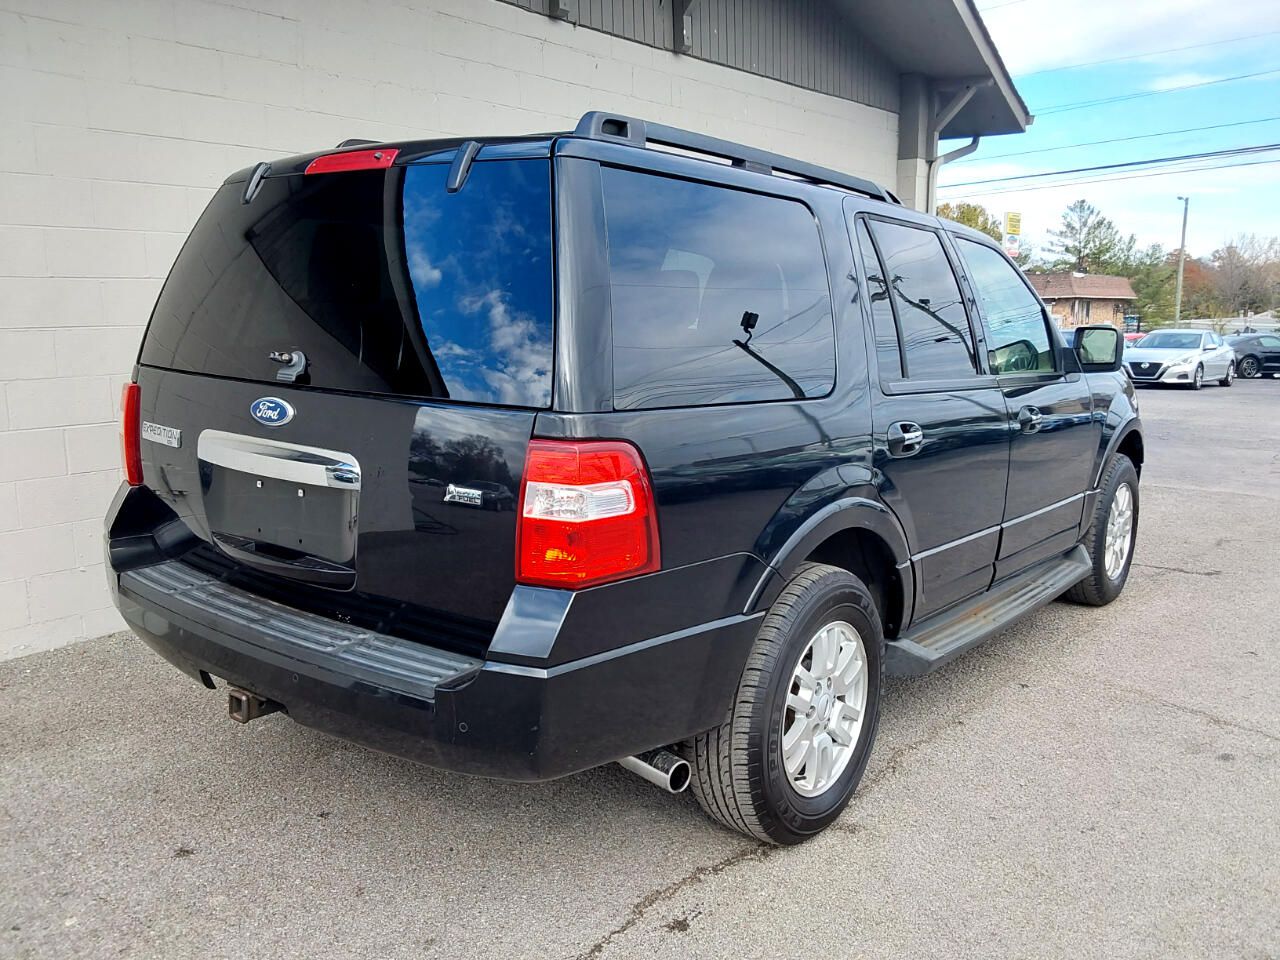 2011 Ford Expedition